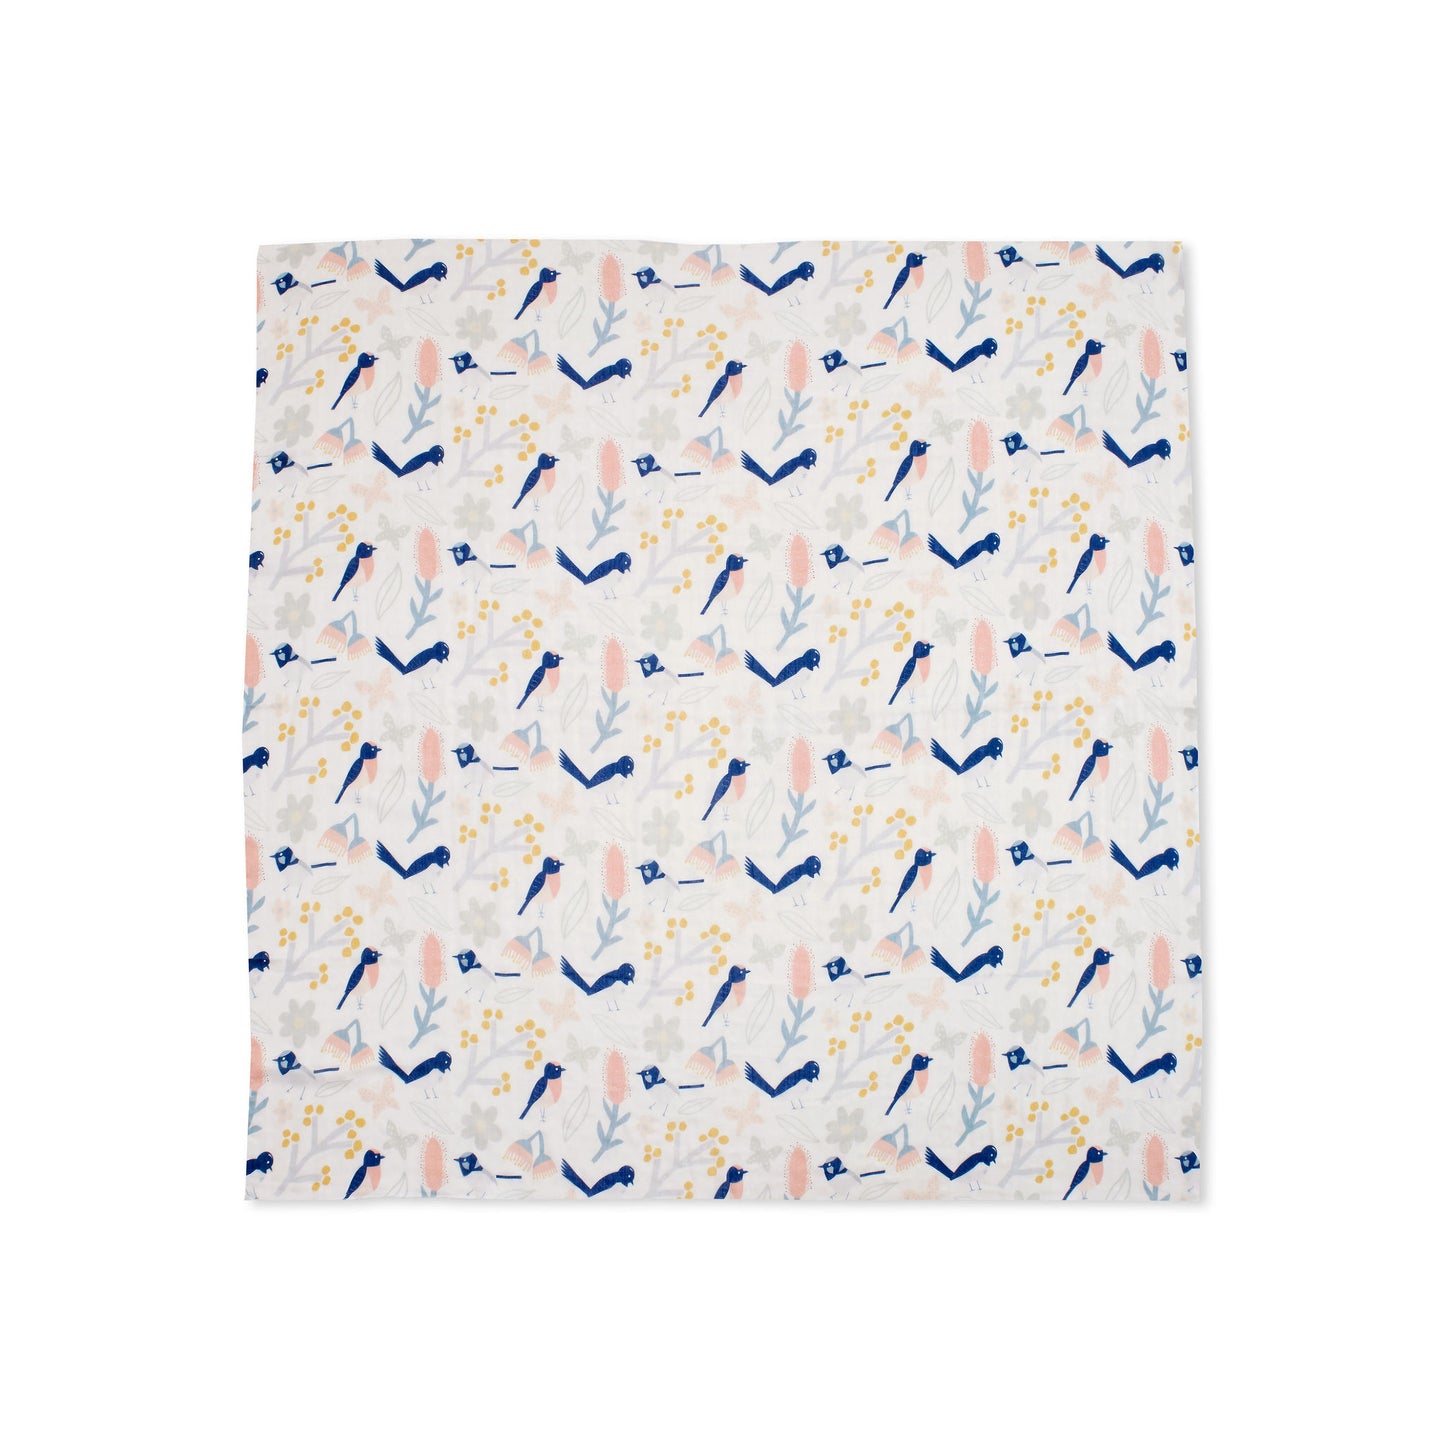 Pebble-and-Poppet-Birdy-Lou-Jane-baby-swaddle-blanket